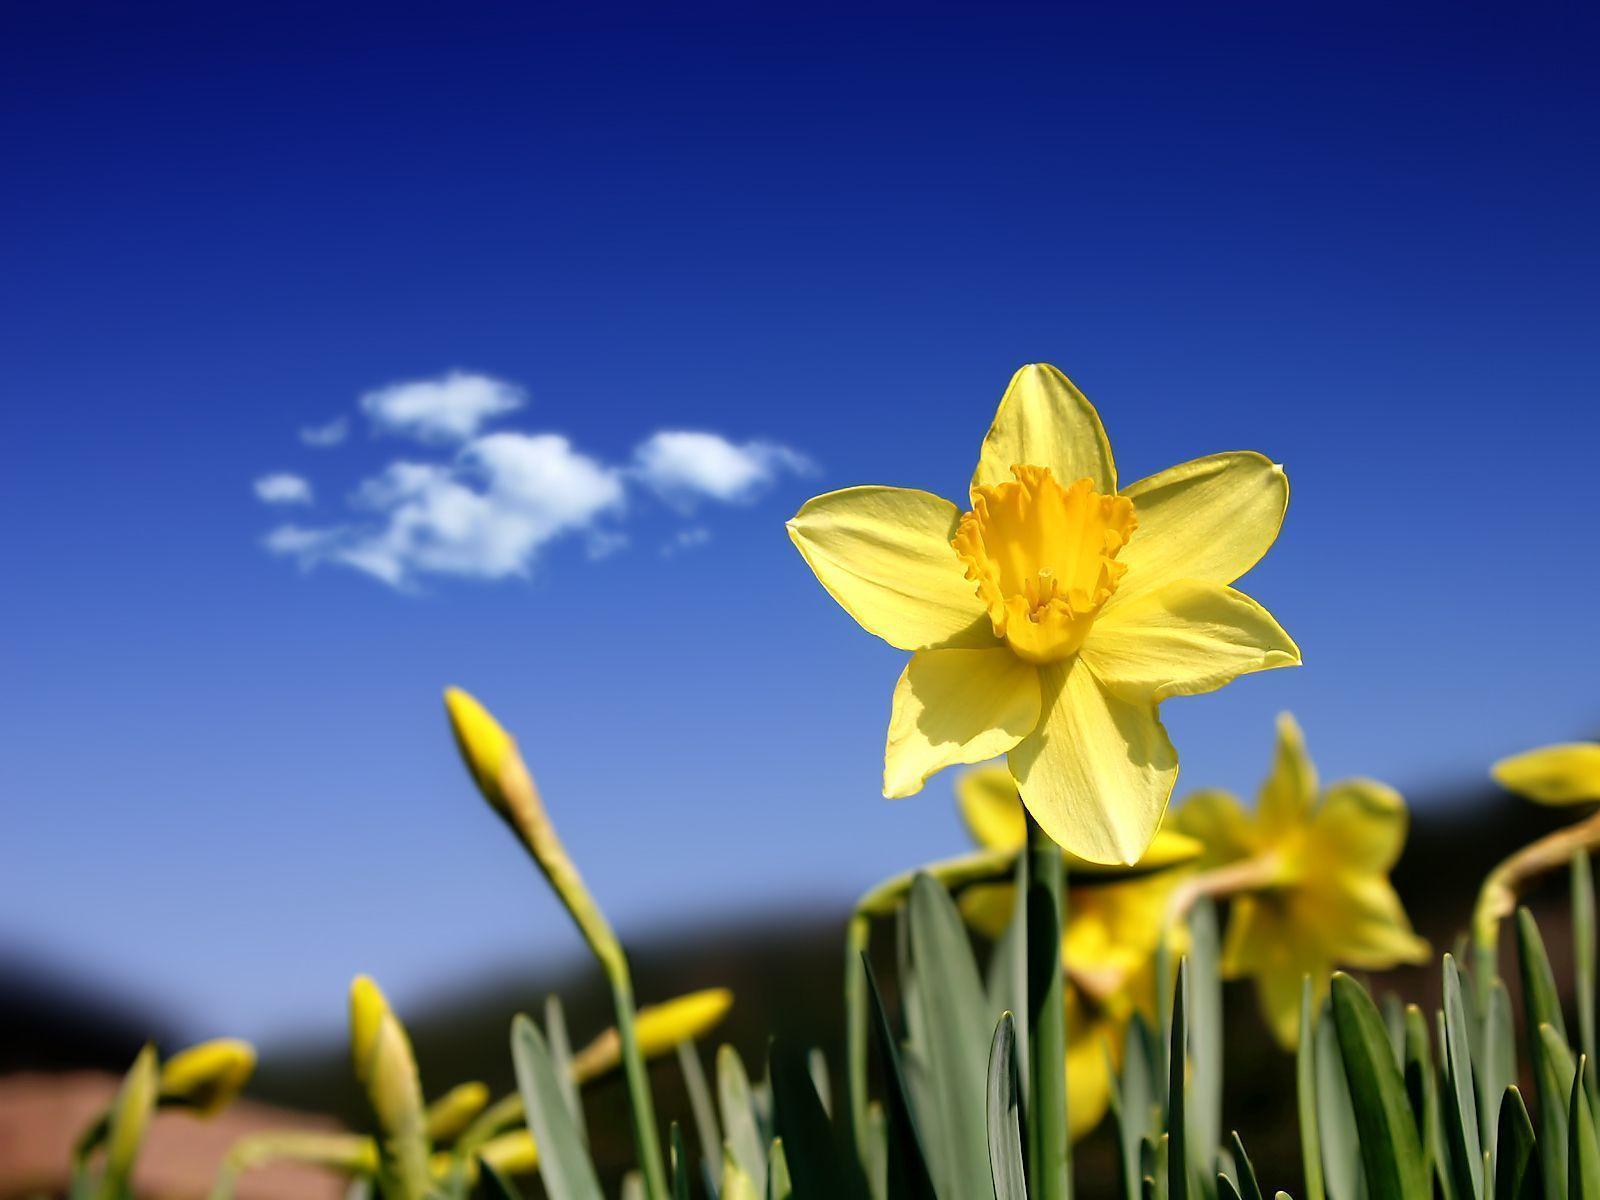 Flowers For > Daffodils Wallpaper